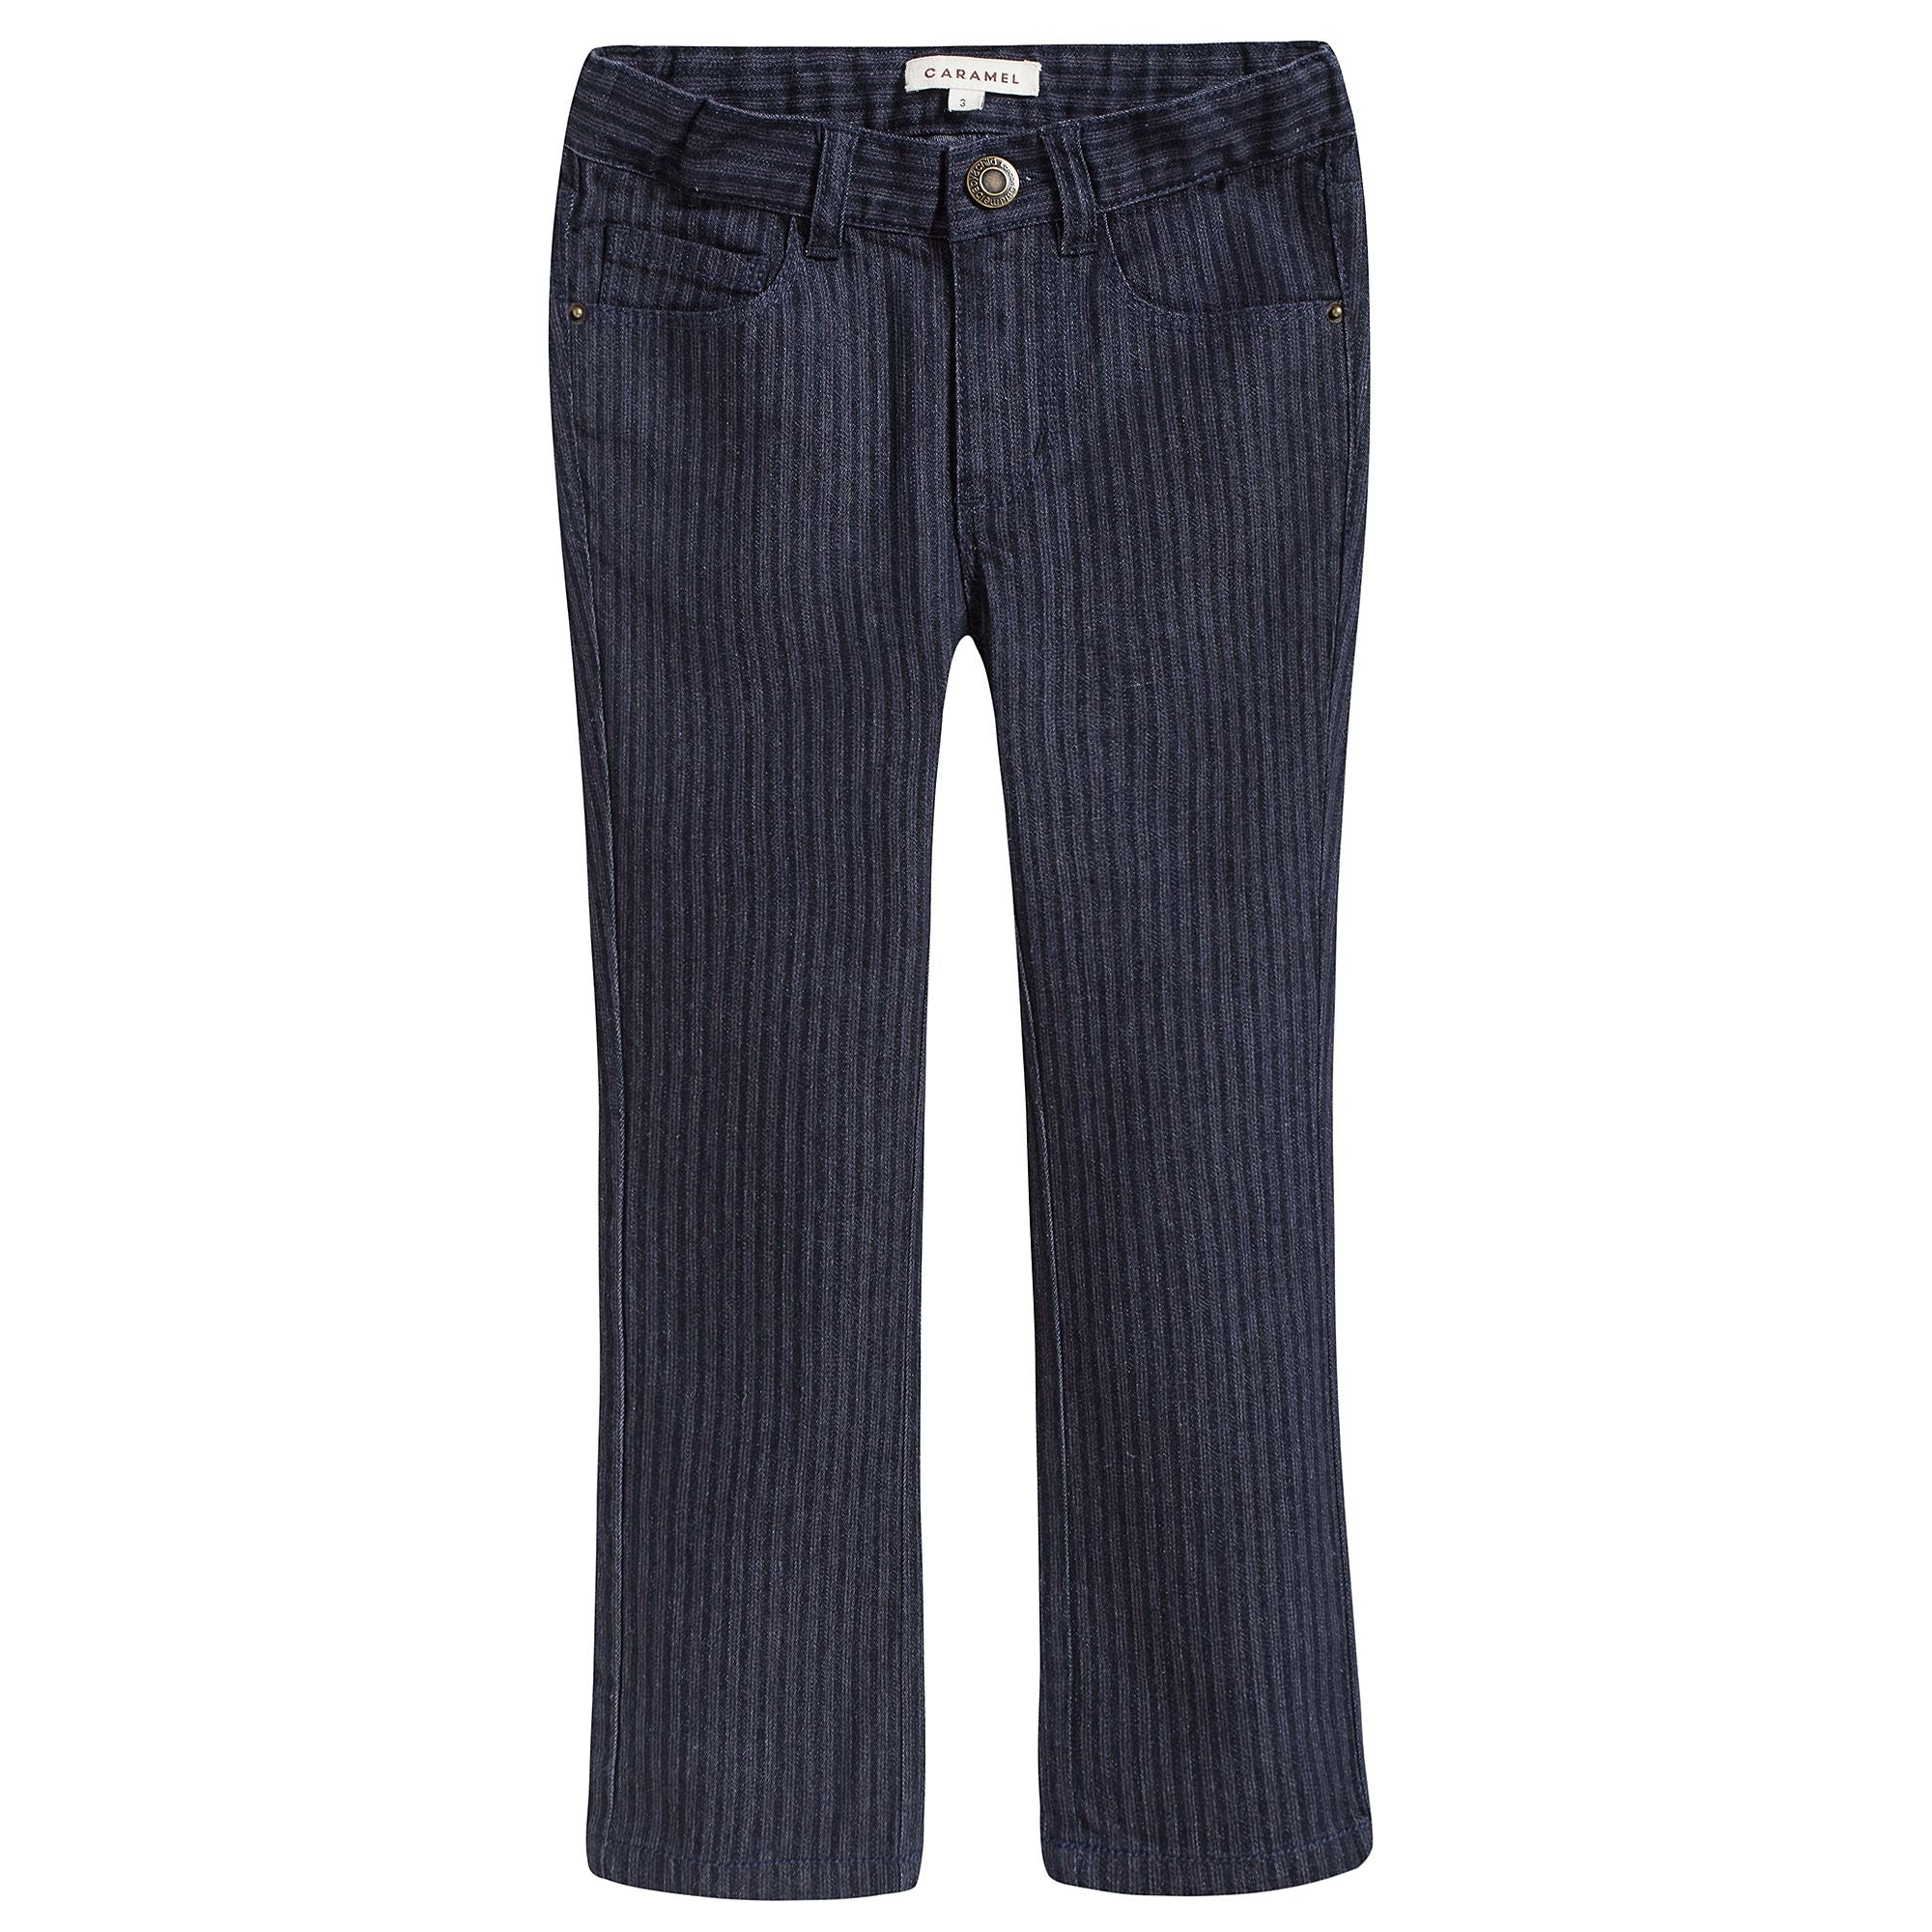 Girls Navy Blue Cotton Trousers